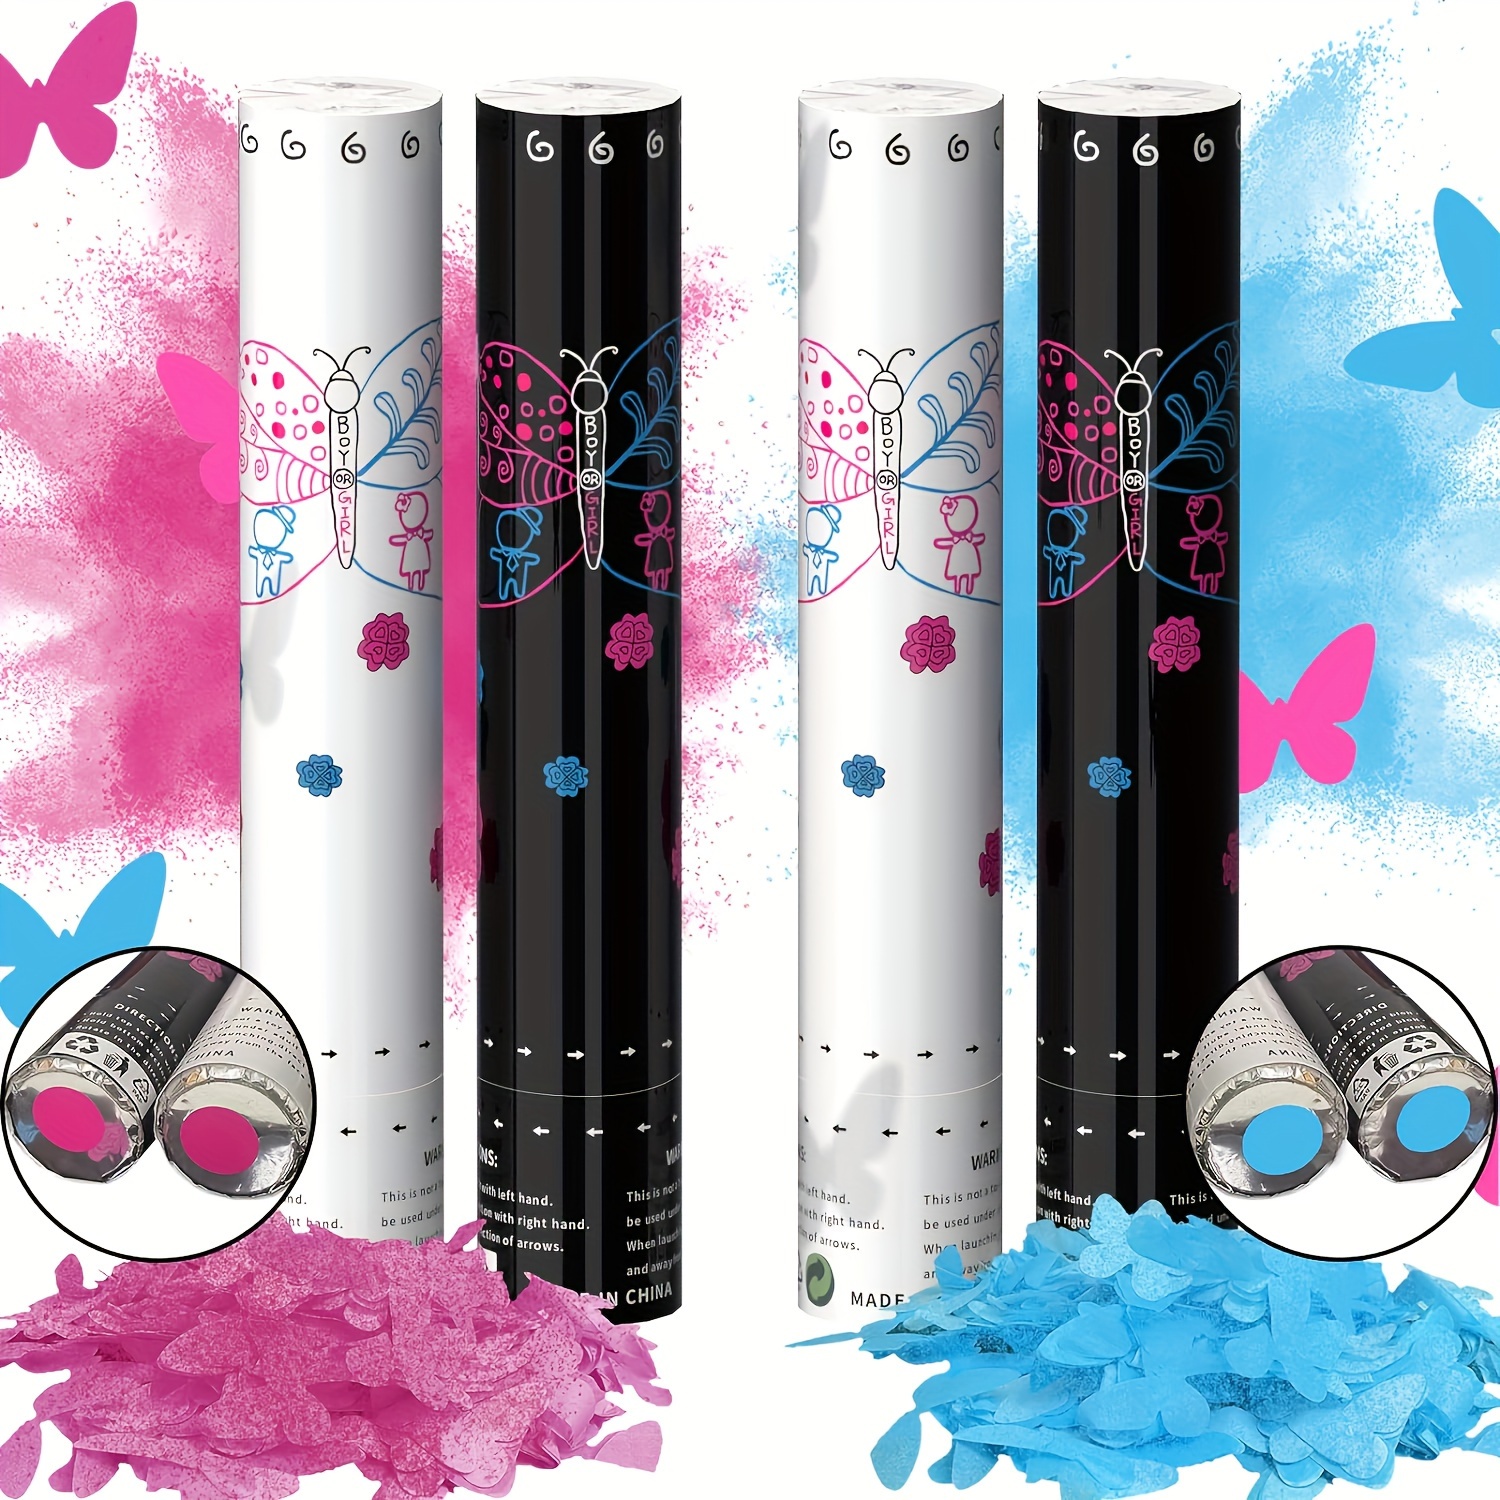 

Gender Reveal Butterfly Confetti Cannon With Color Powder, 4 Pack Blue And Pink Heart-shaped Confetti Poppers Smoke, 12inch Boy Or Girl Butterfly Theme Stick